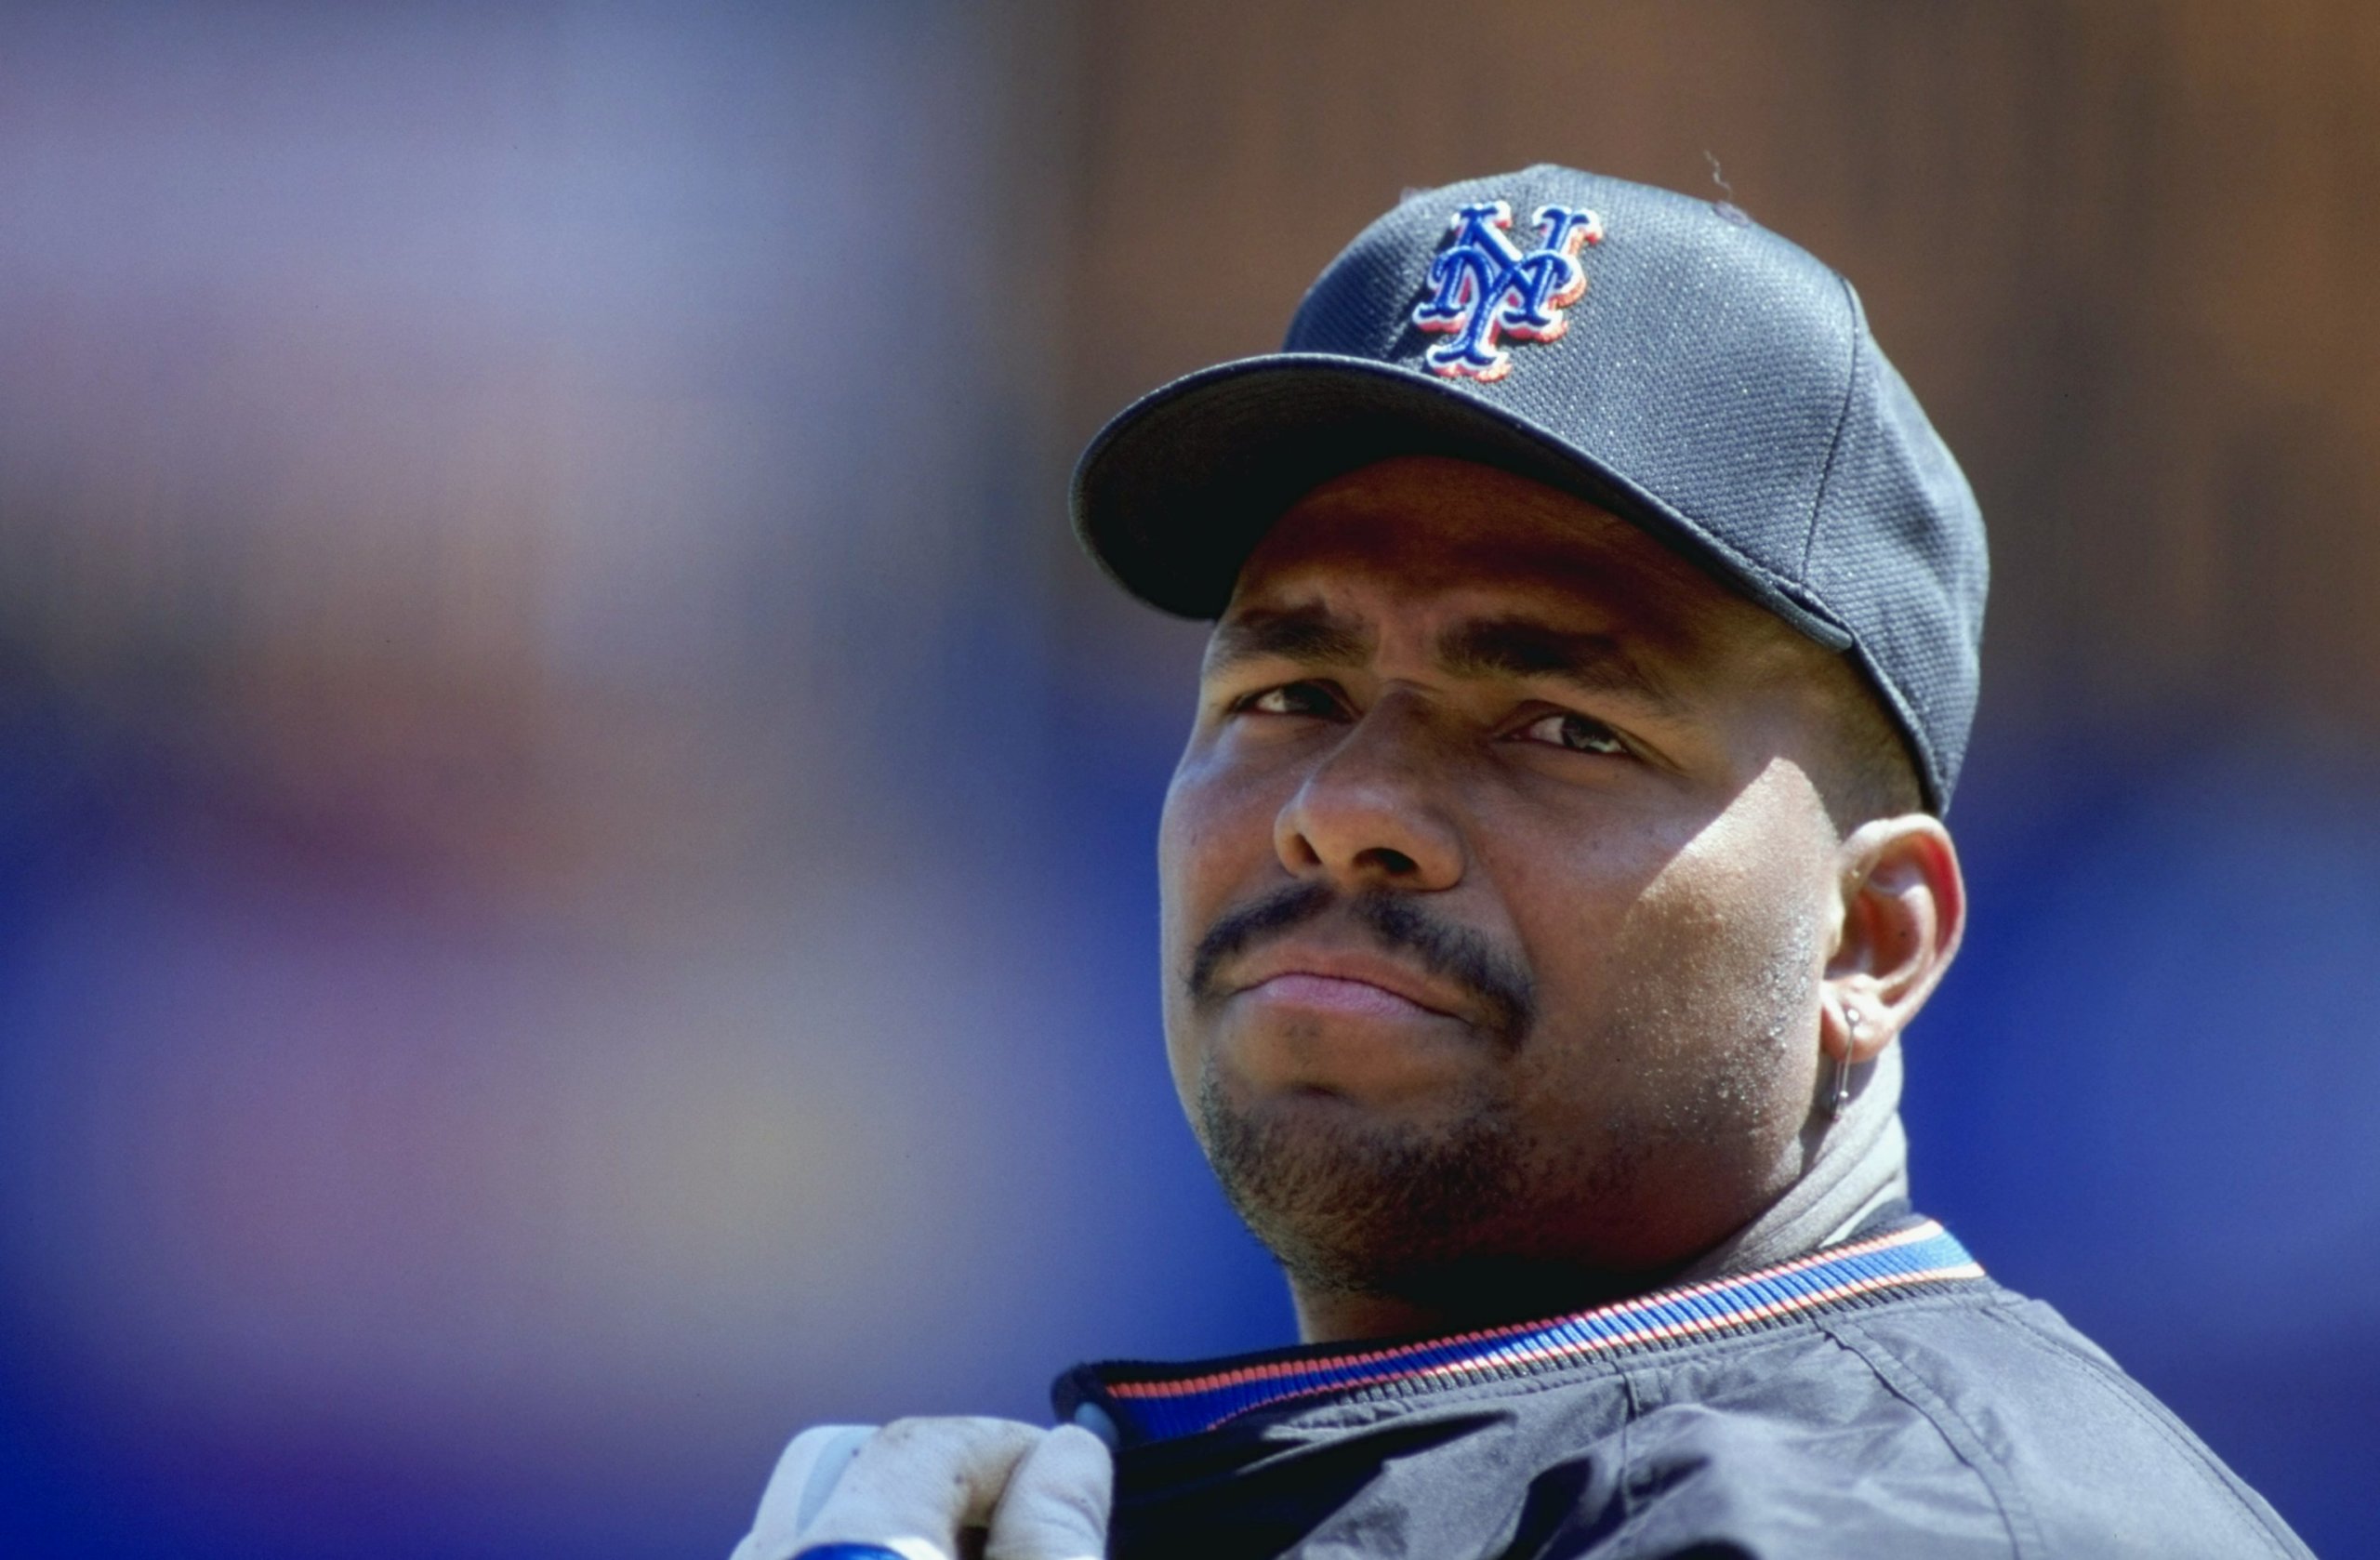 Former Met Bobby Bonilla celebrates his special day with an Airbnb